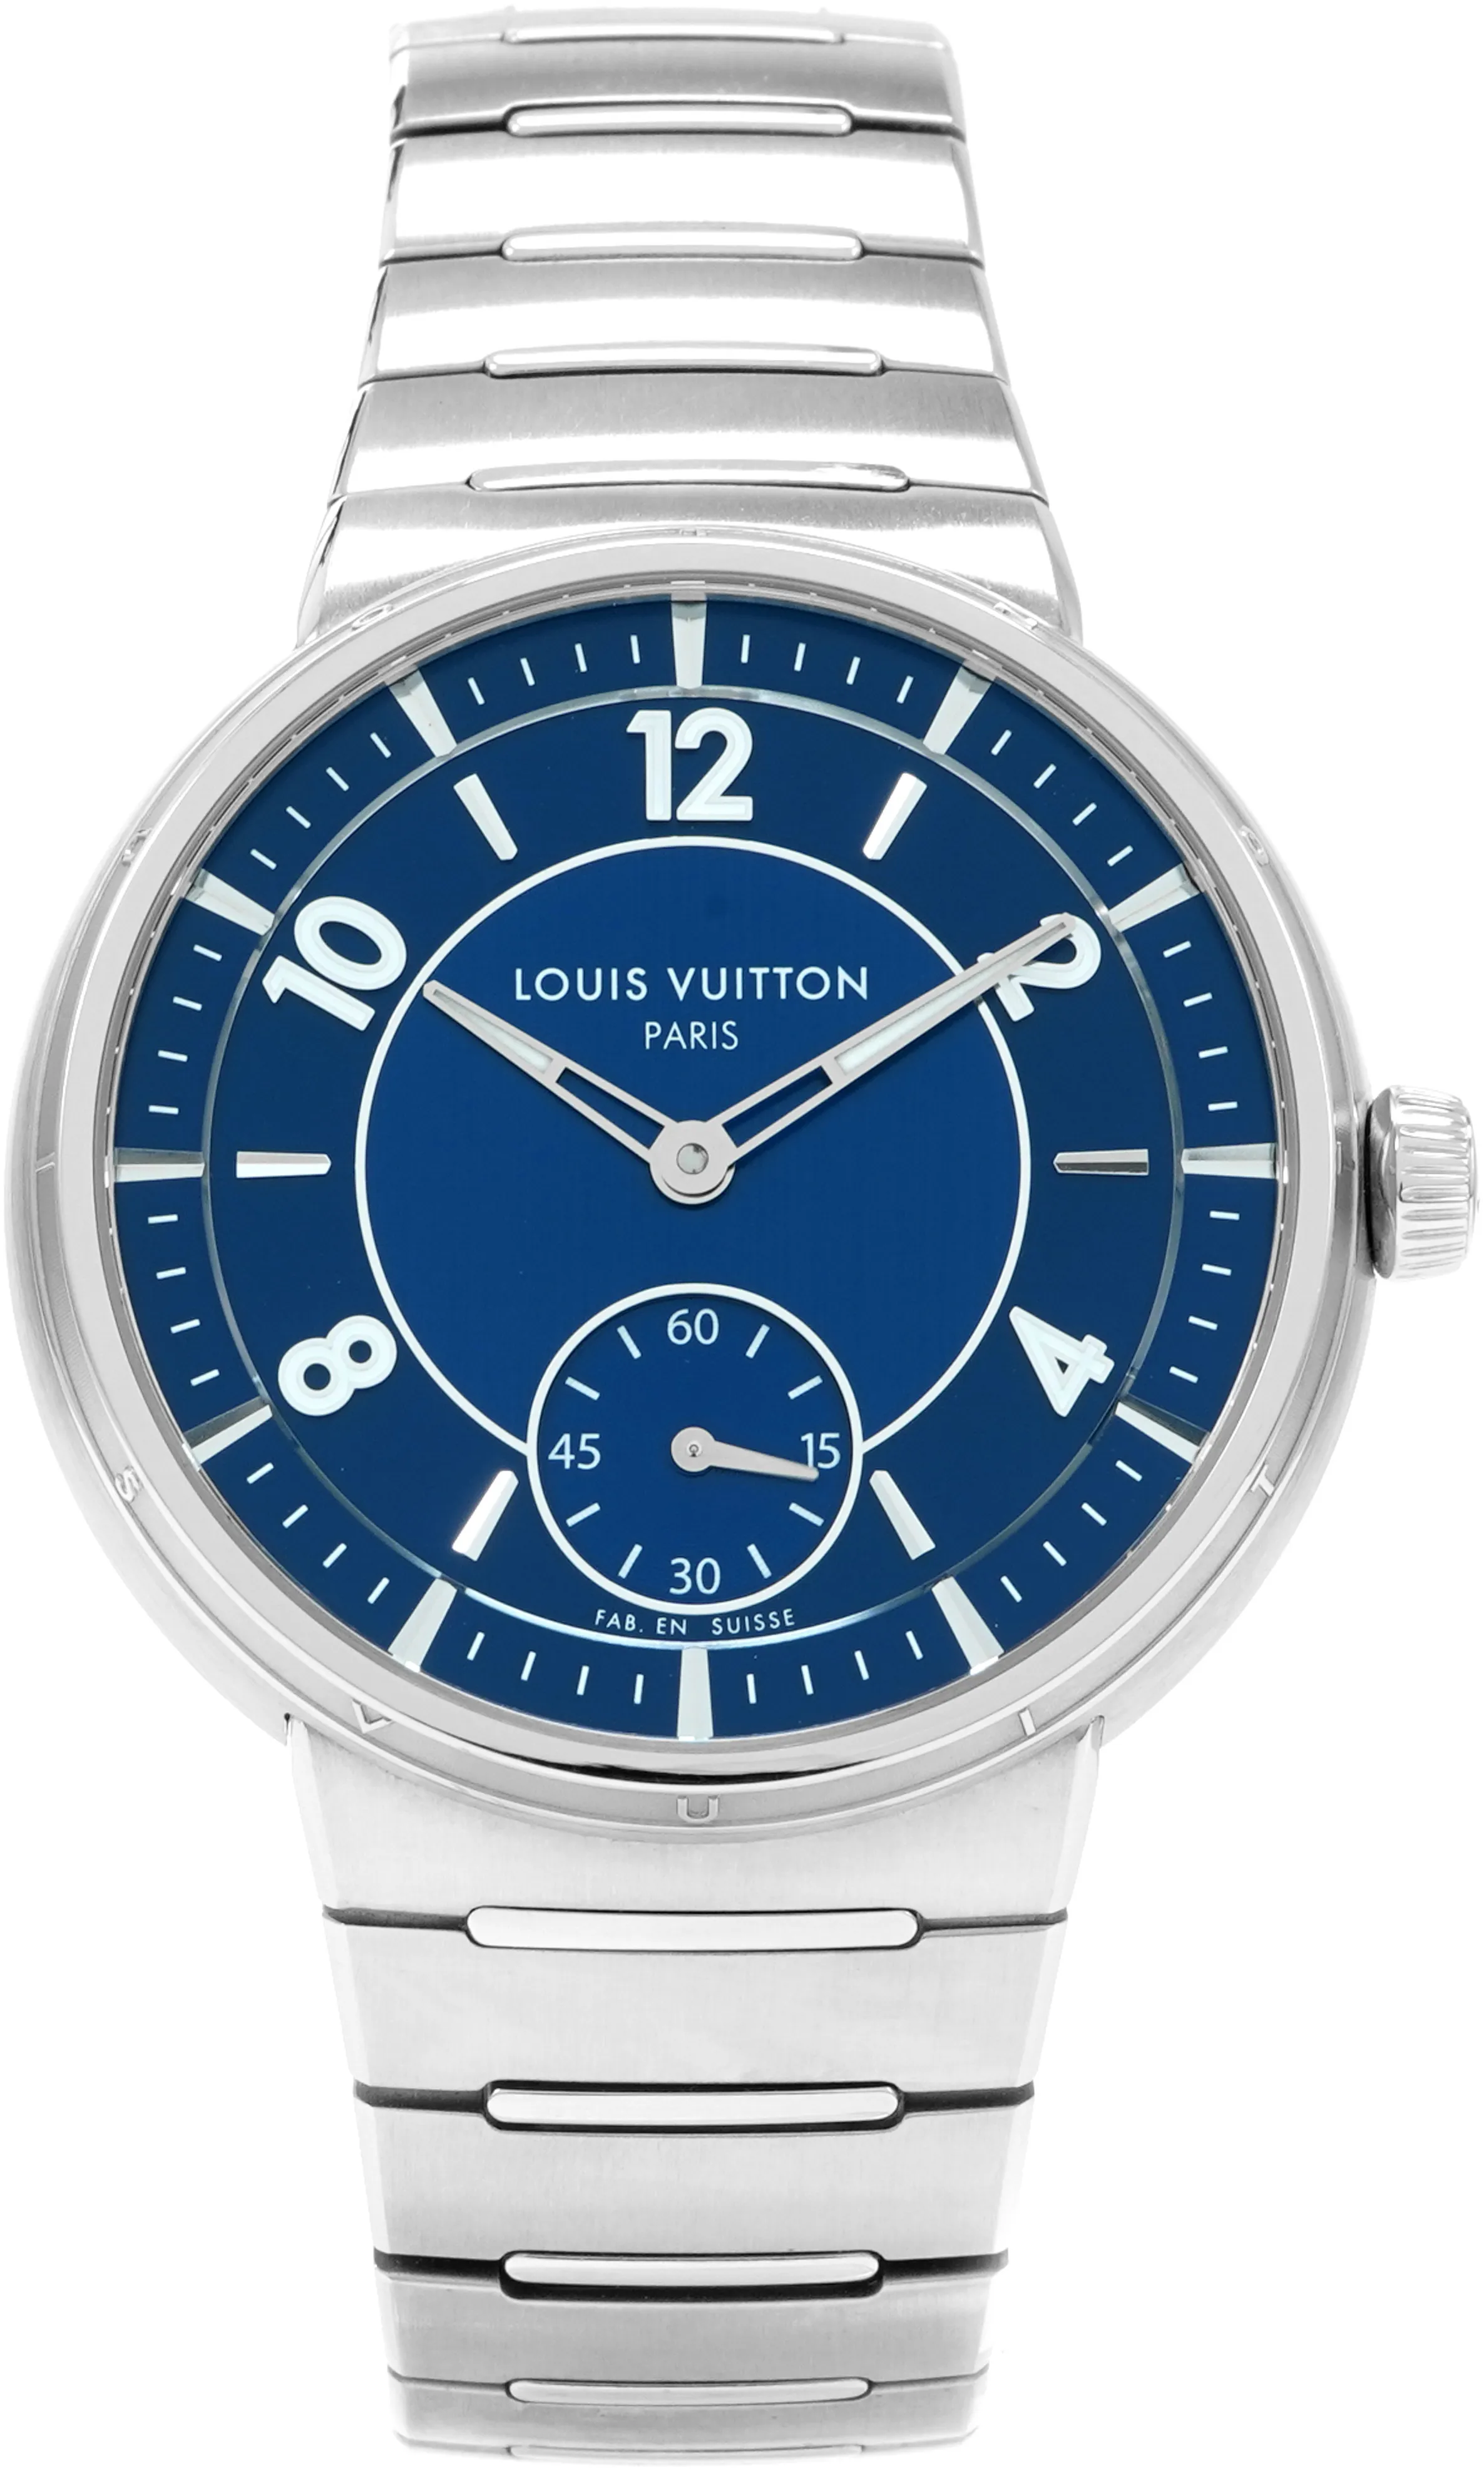 Louis Vuitton Tambour W1ST20 40mm Stainless steel